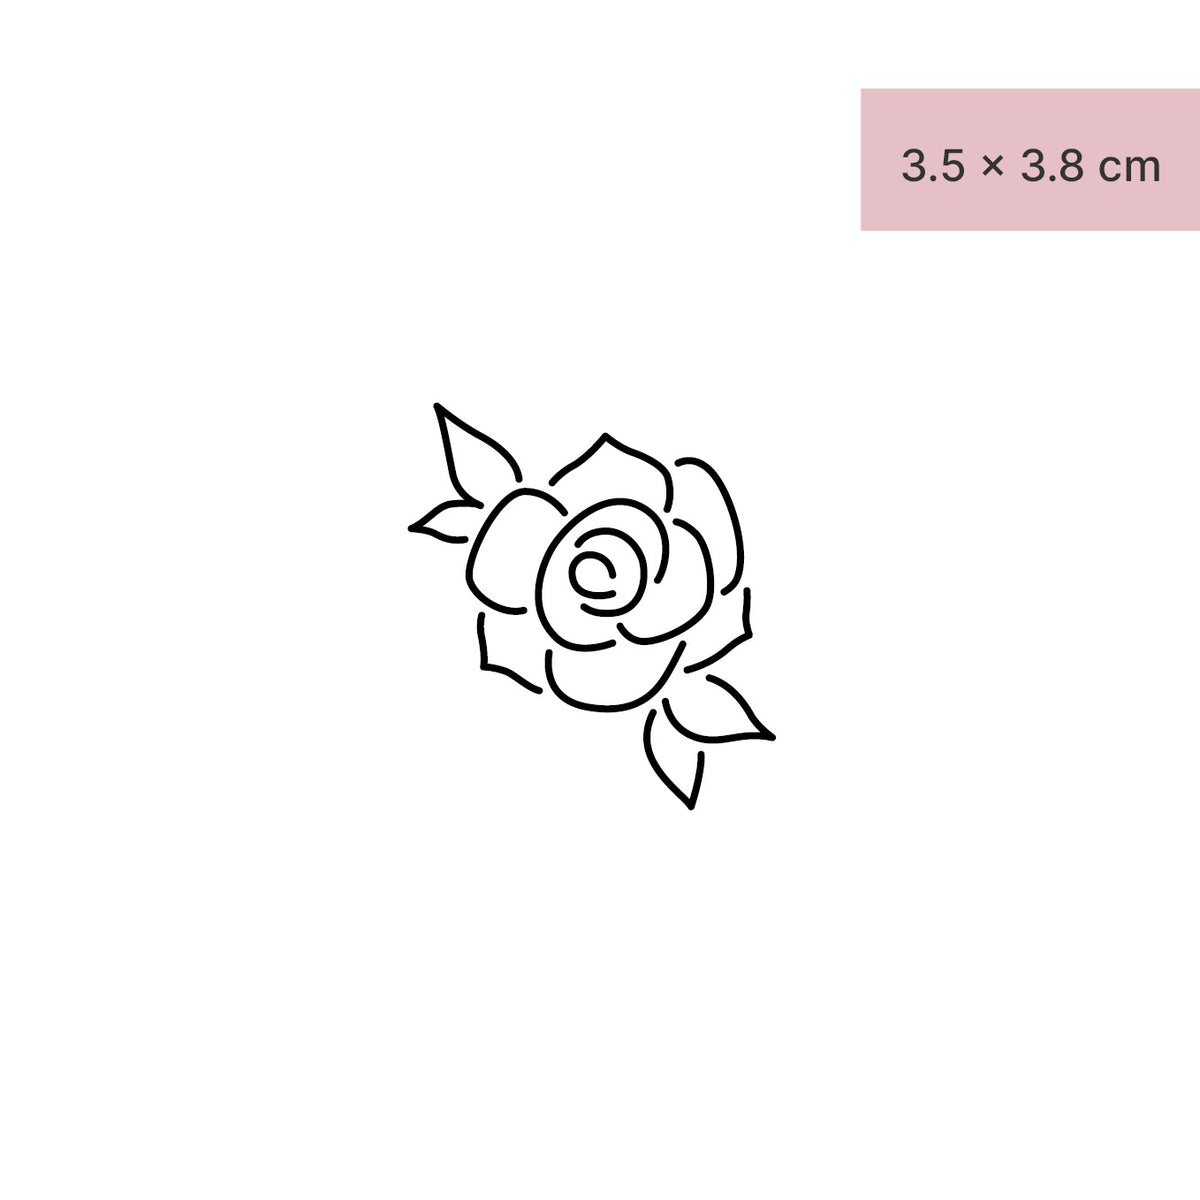 How to Draw a Classic Tattoo Style Rose | ehow